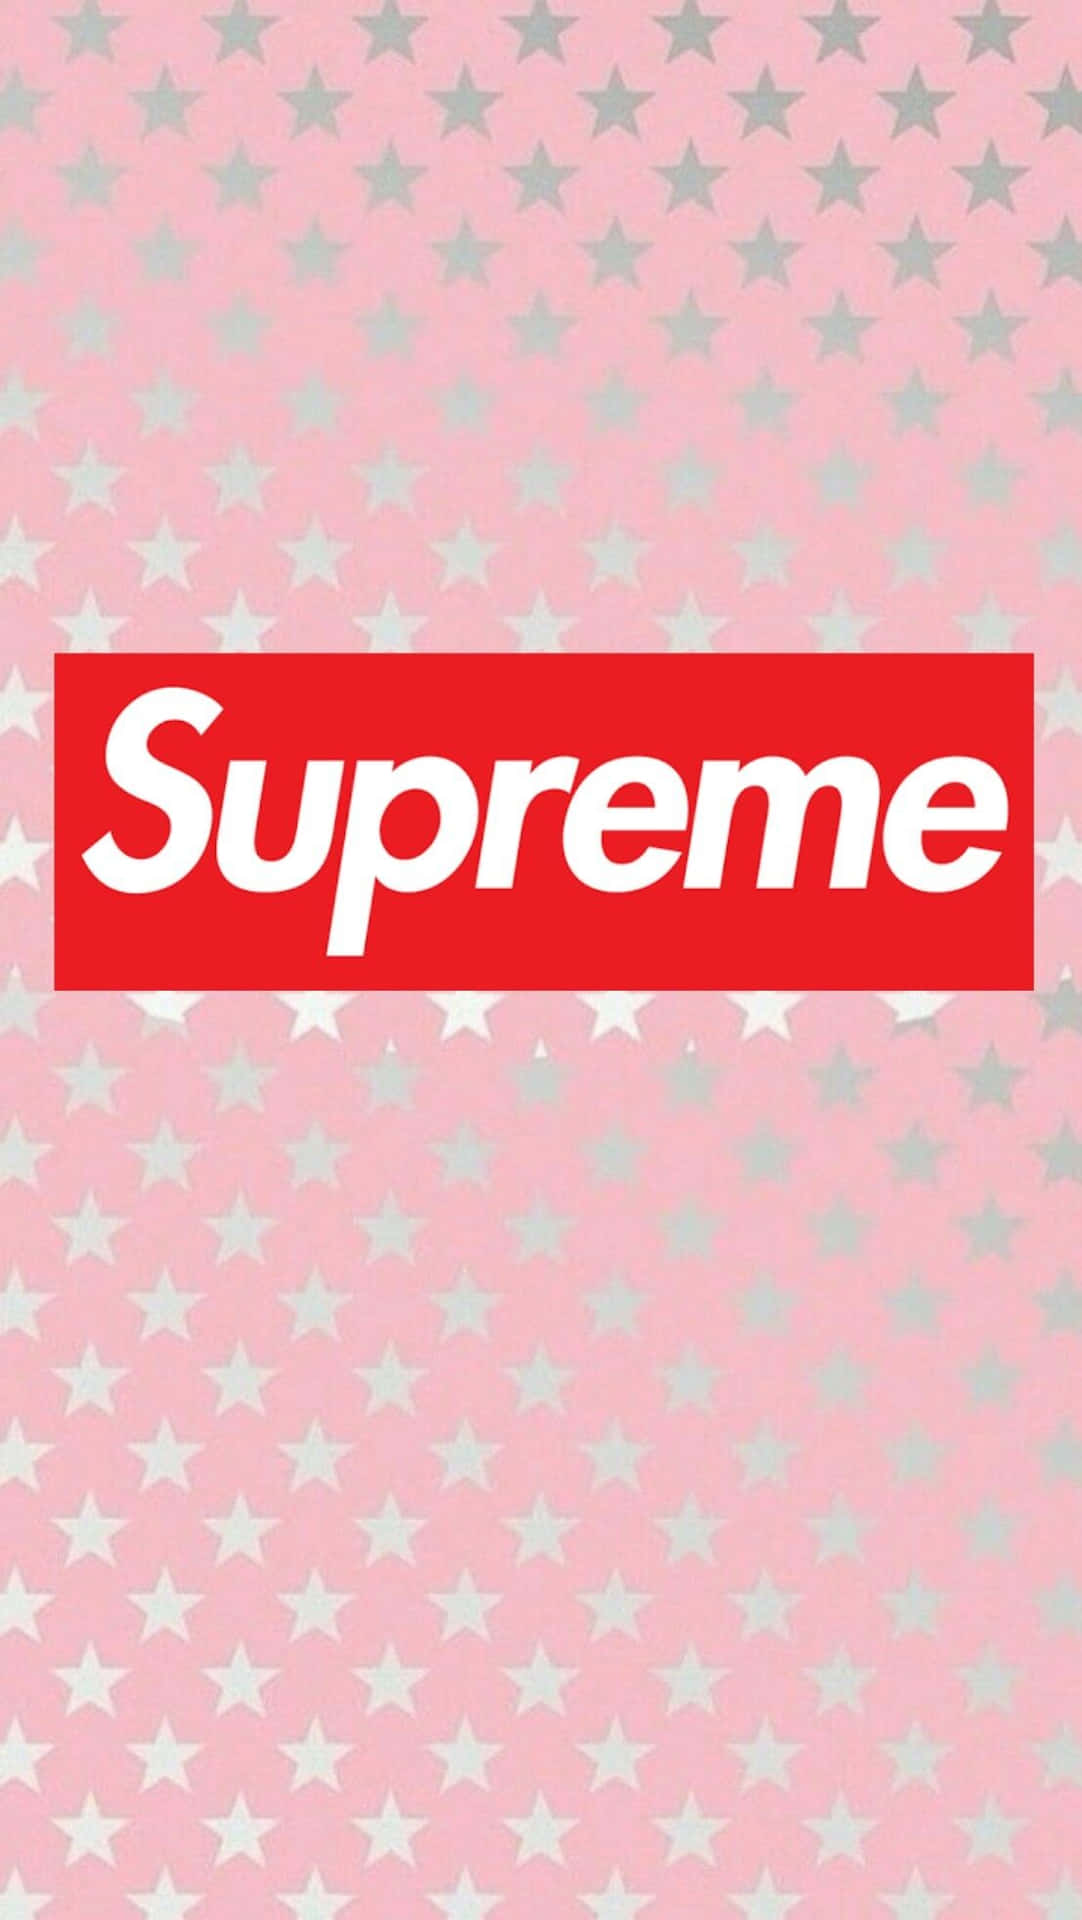 Show off your cool style with the Supreme iPhone Wallpaper